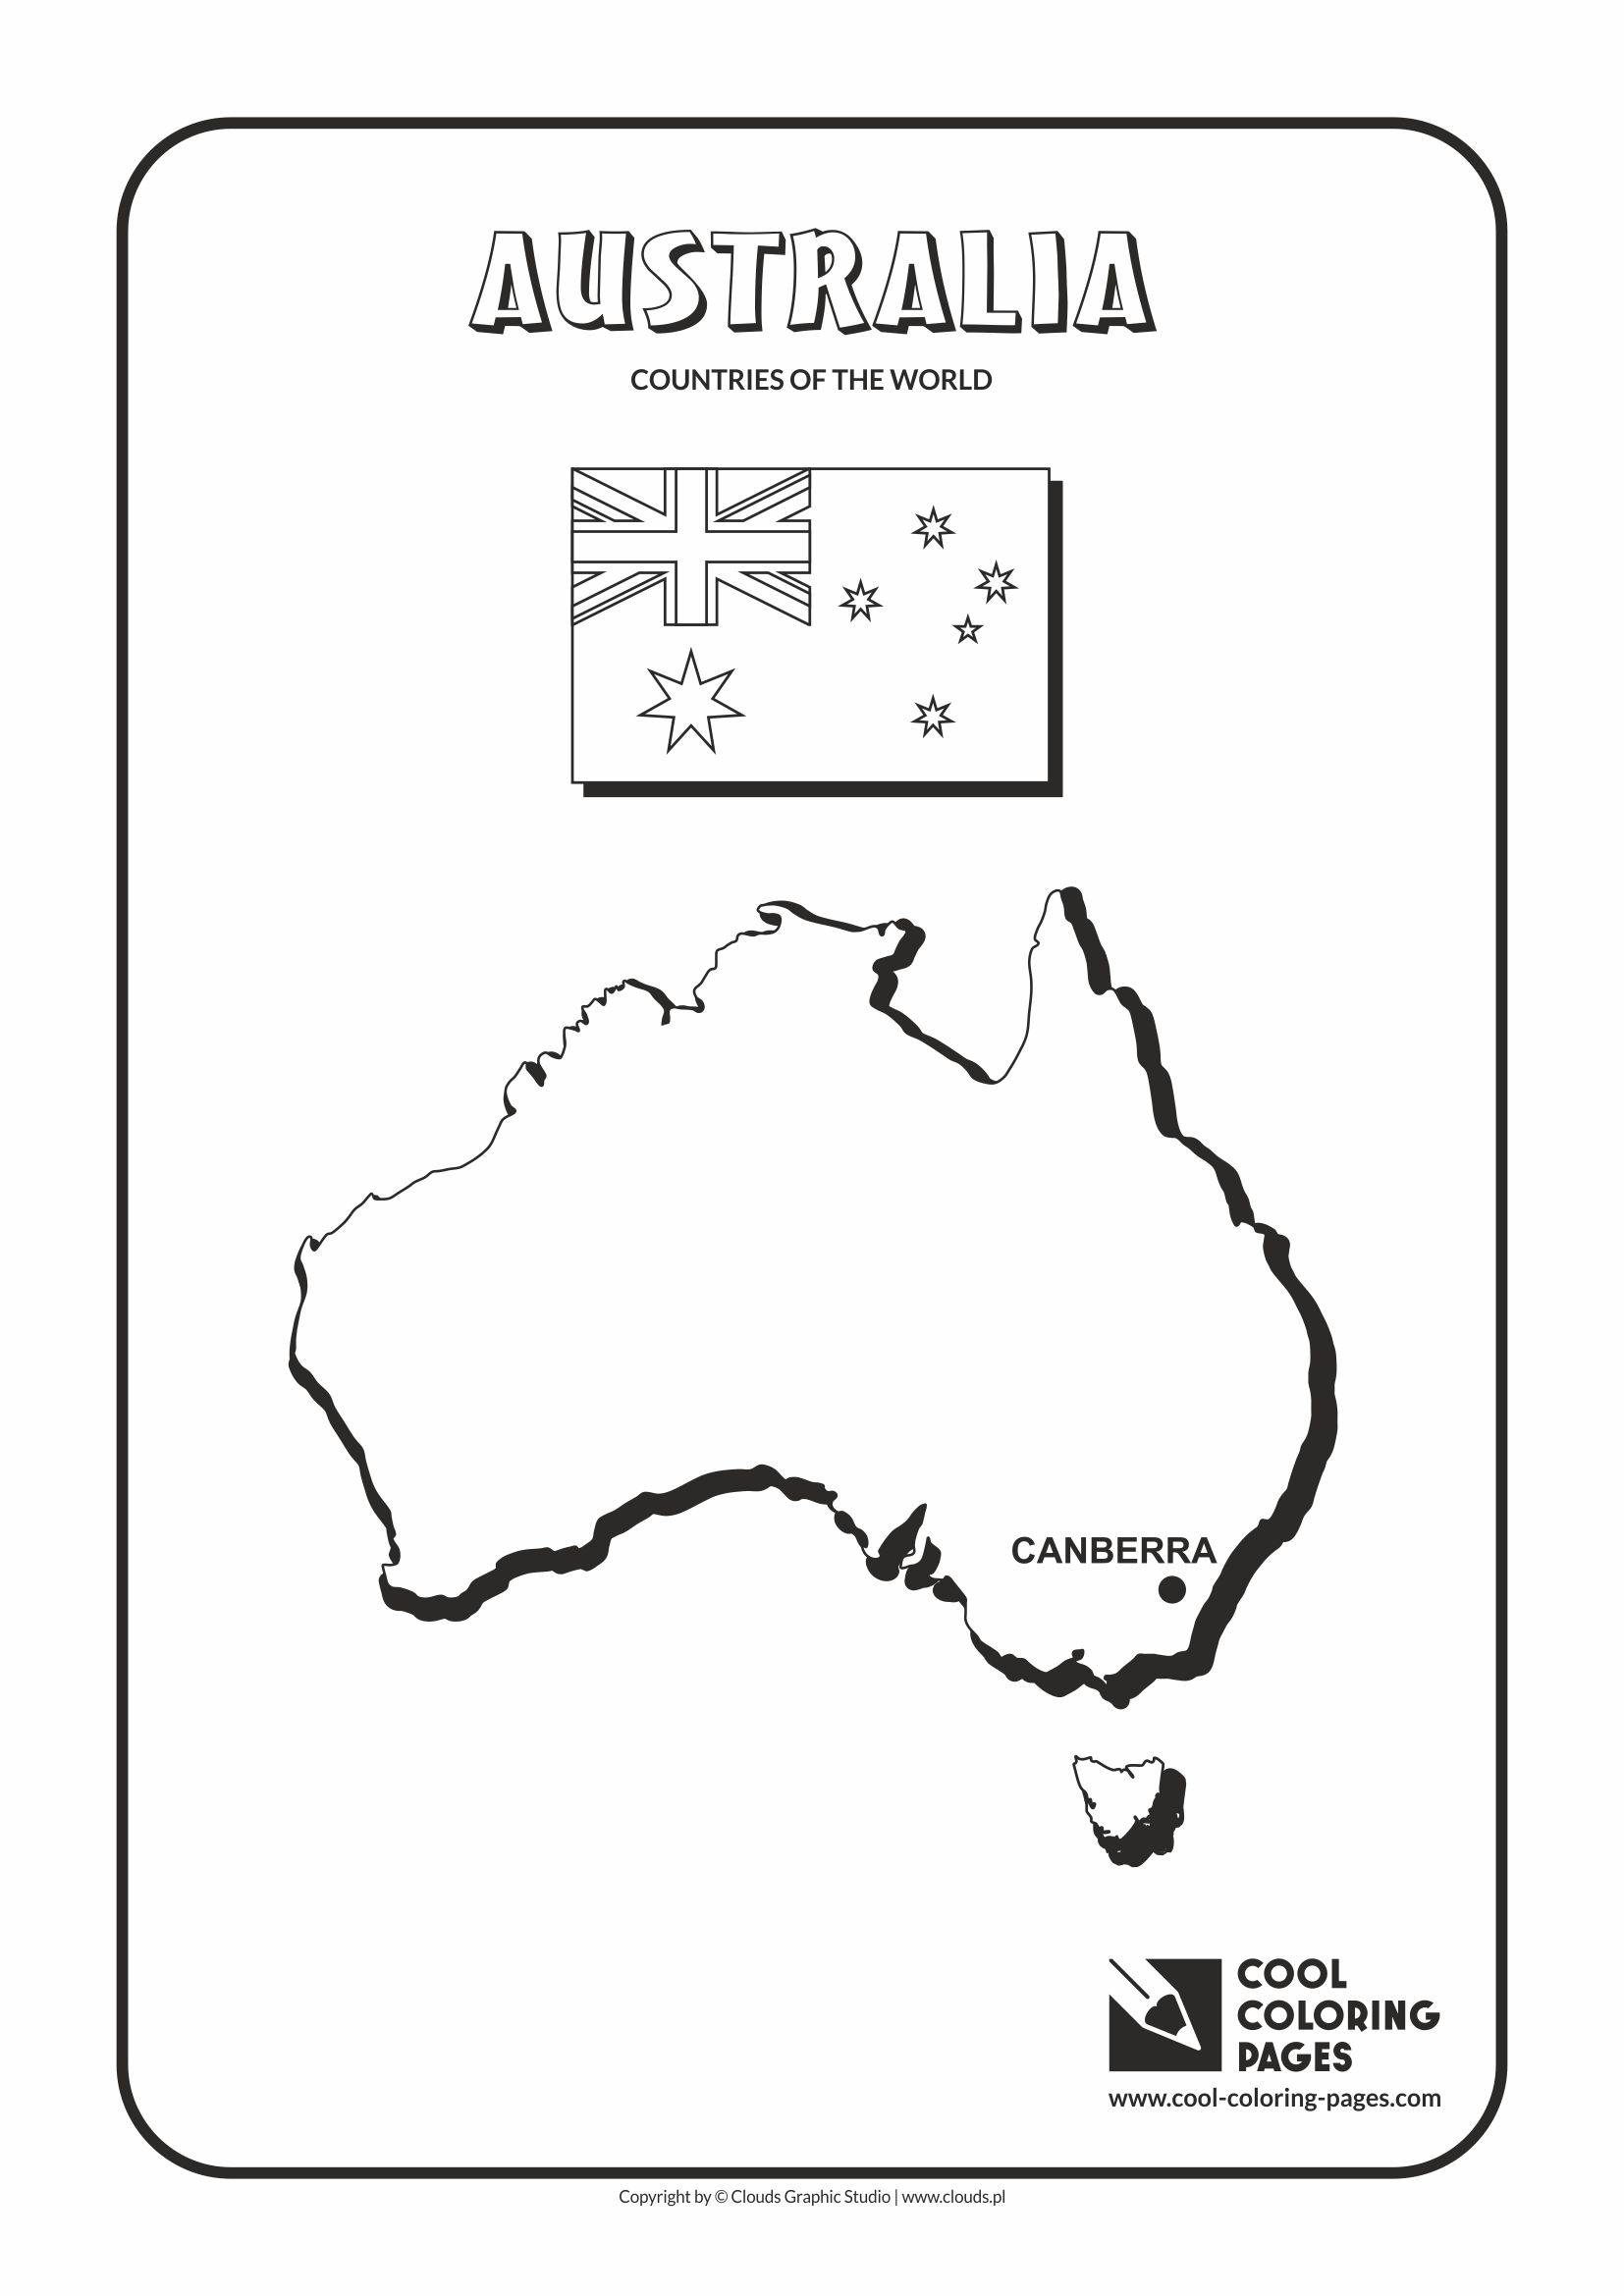 Cool Coloring Pages - Countries of the world / Australia